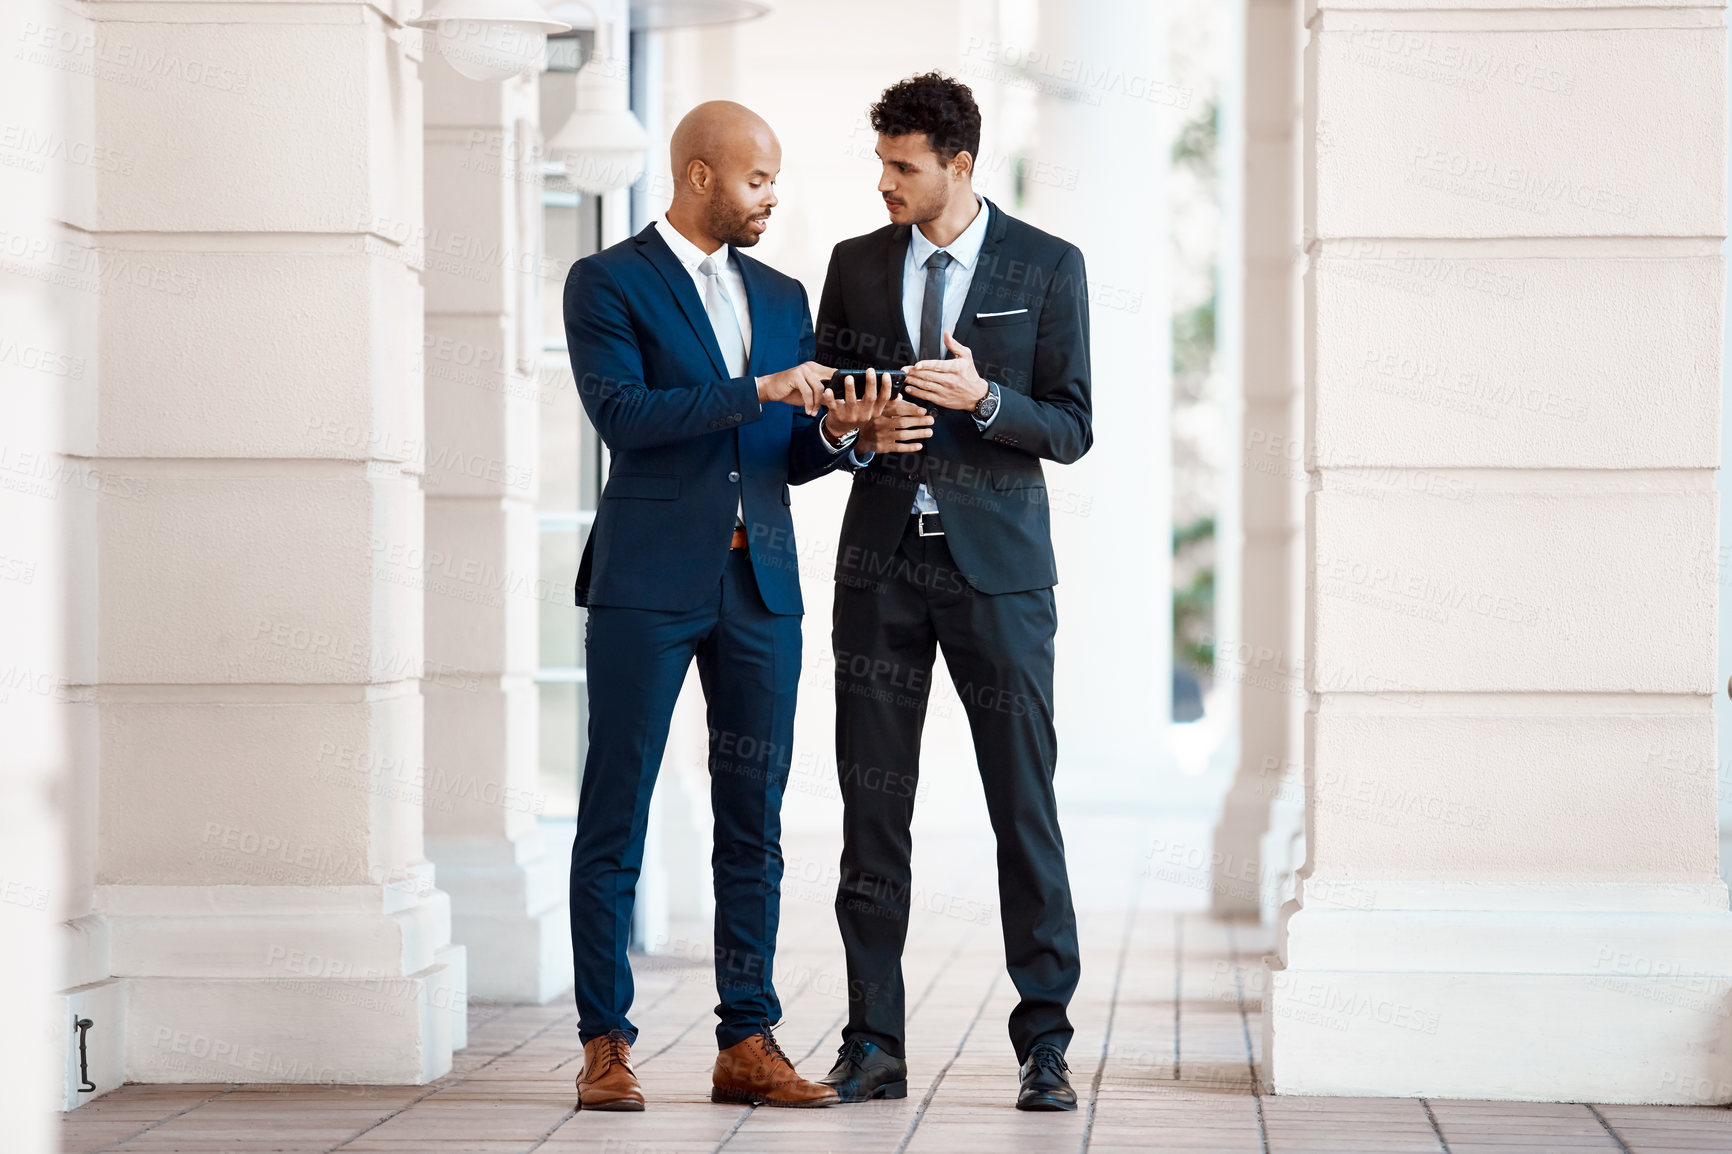 Buy stock photo Shot of young handsome businessmen using a cellphone together outside